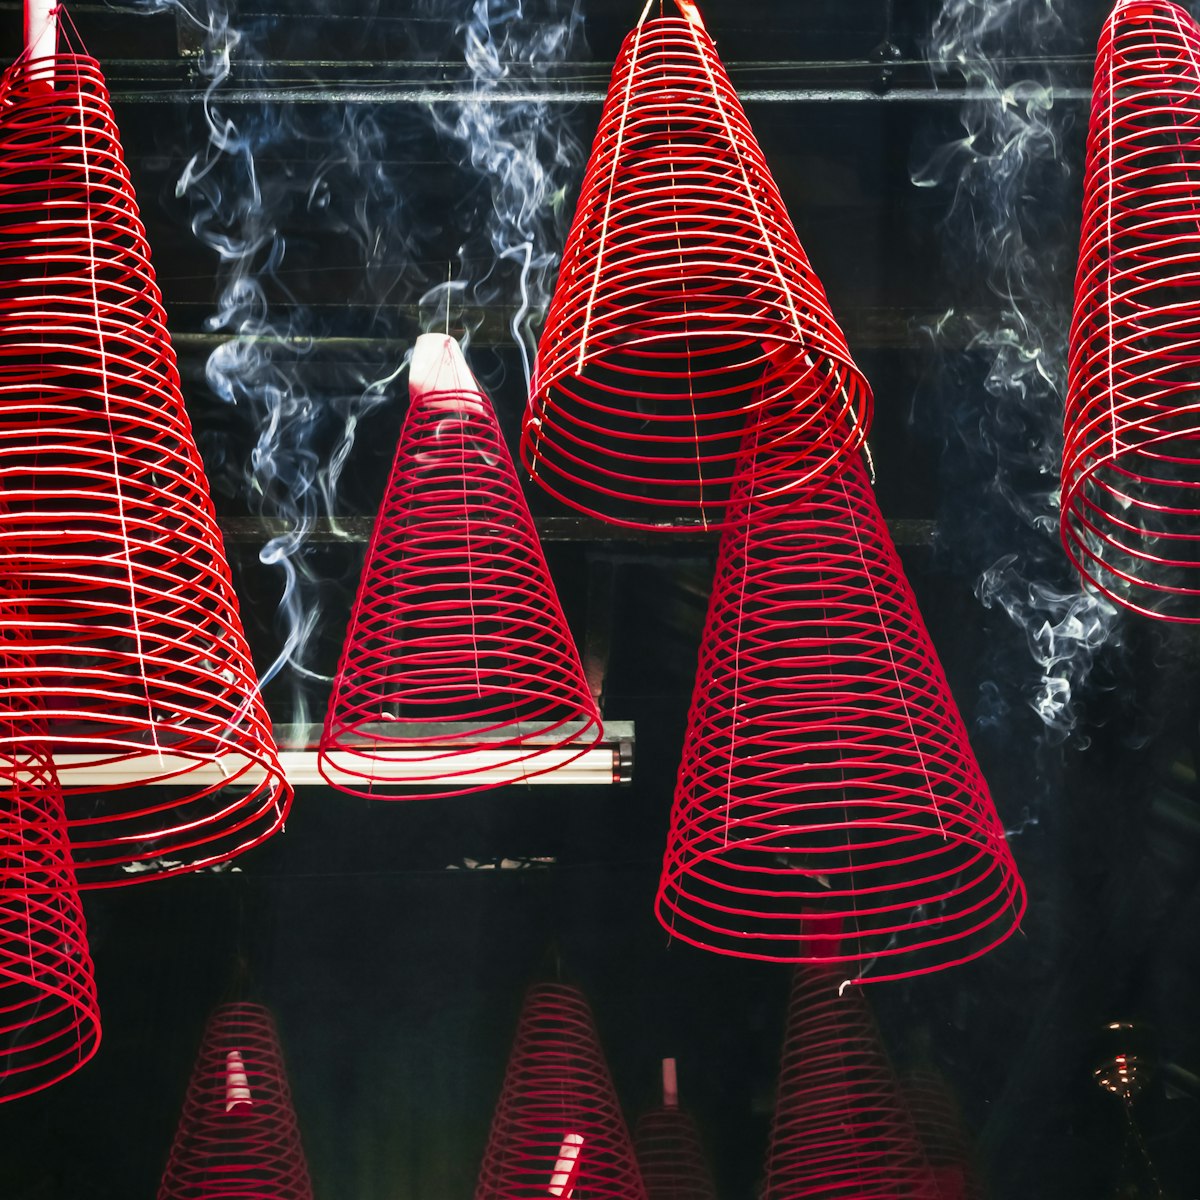 Coiled red incense, Phuoc An Hoi Quan  Pagoda